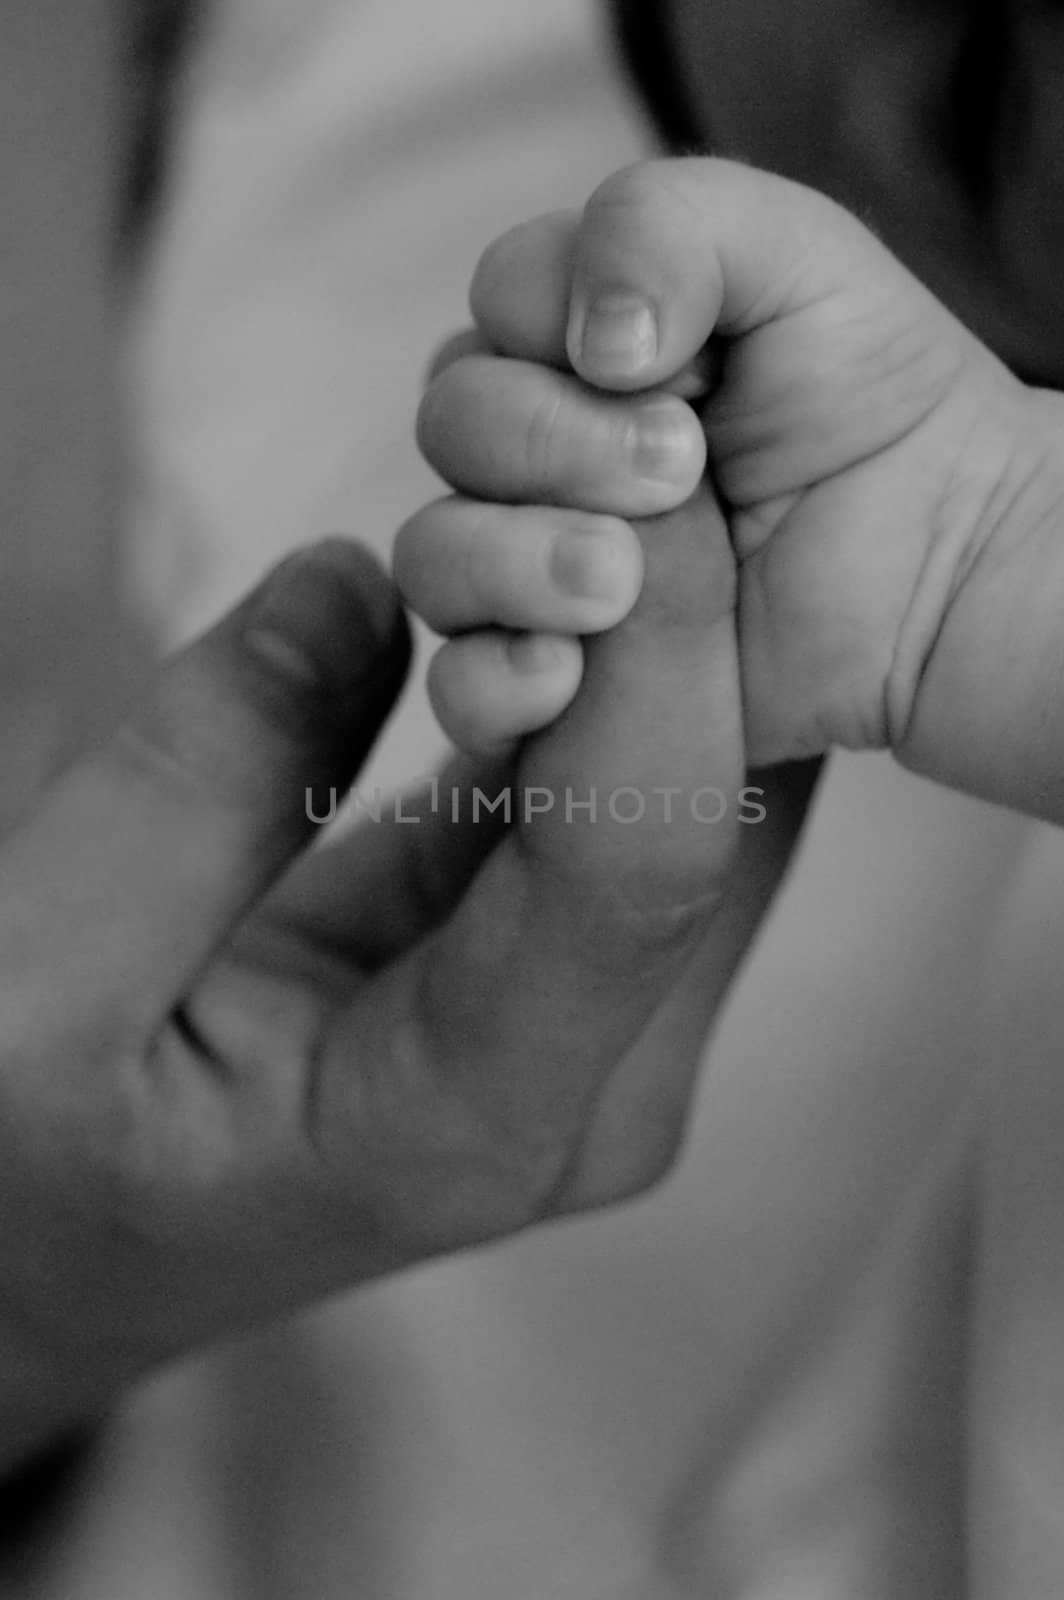 Baby hold mother finger, black and white